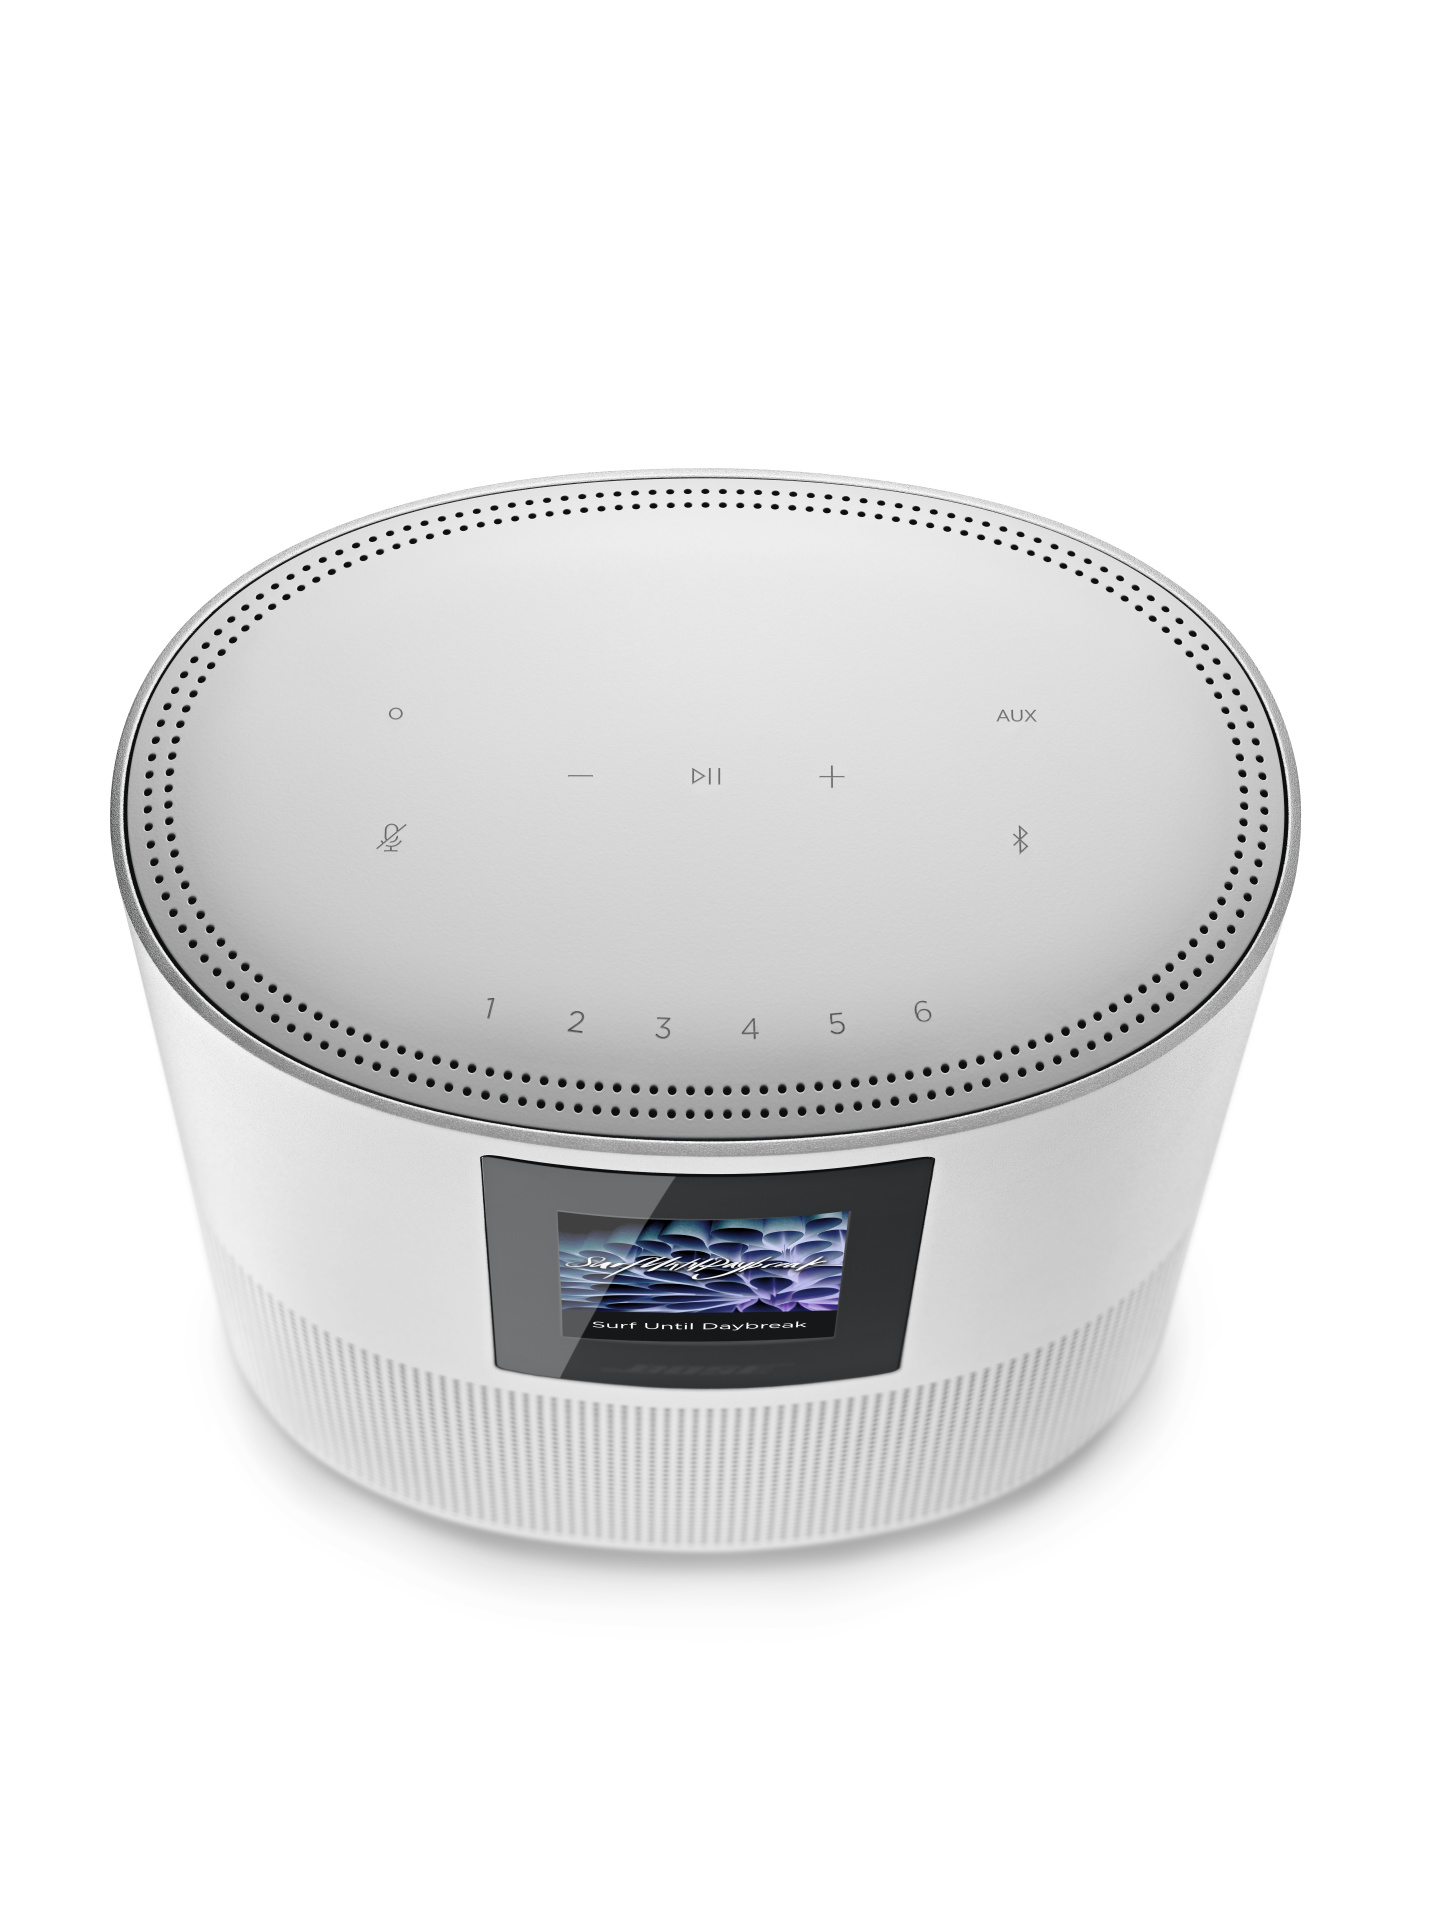 Bose Smart Speaker 500 with Wi-Fi, Bluetooth and Voice Control Built-in, Silver - image 4 of 6